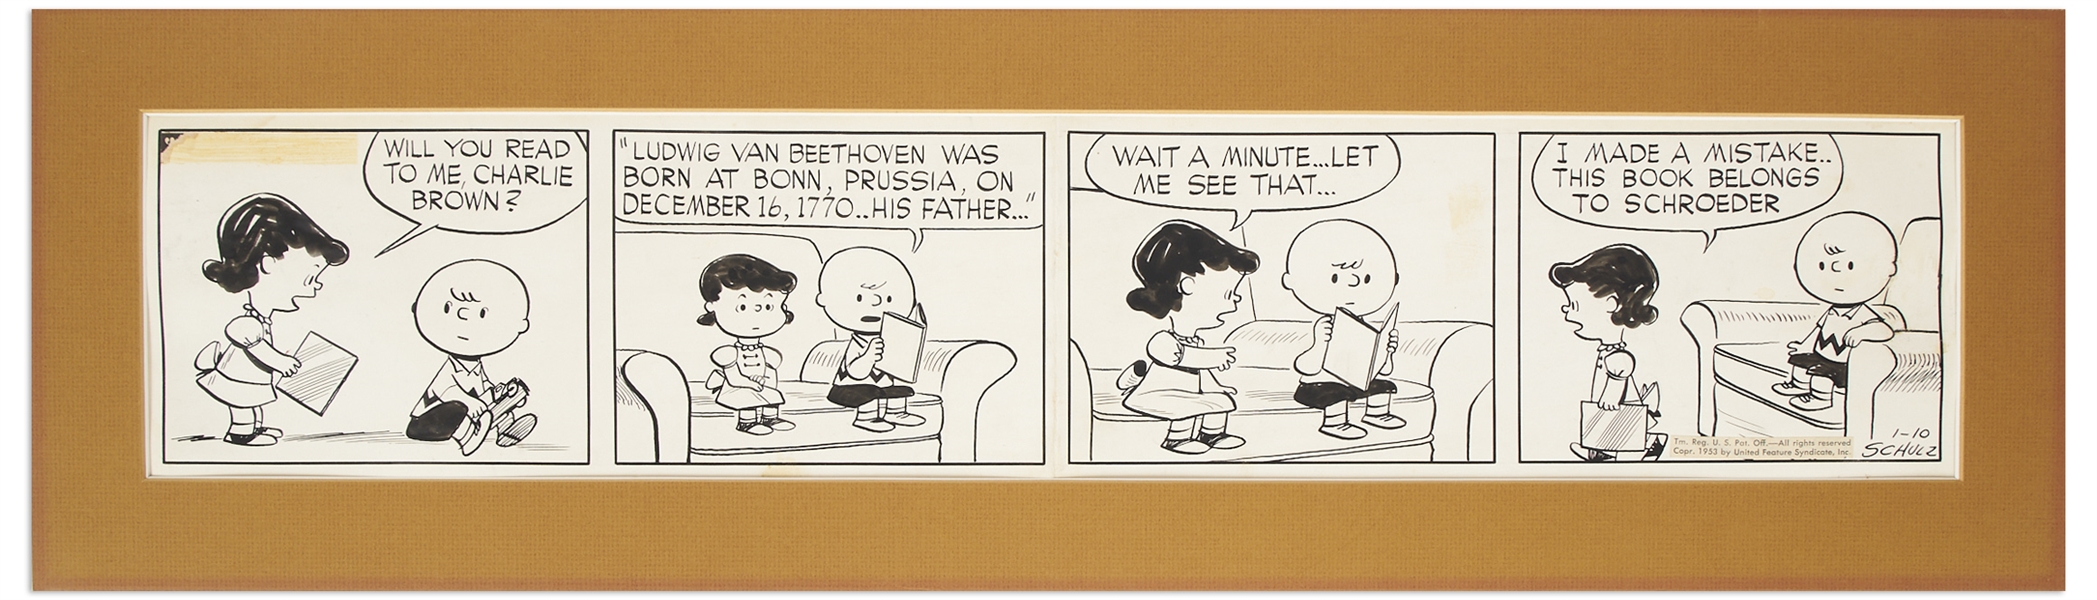 Very Early 1953 ''Peanuts'' Comic Strip by Charles Schulz -- Featuring Charlie Brown & Lucy